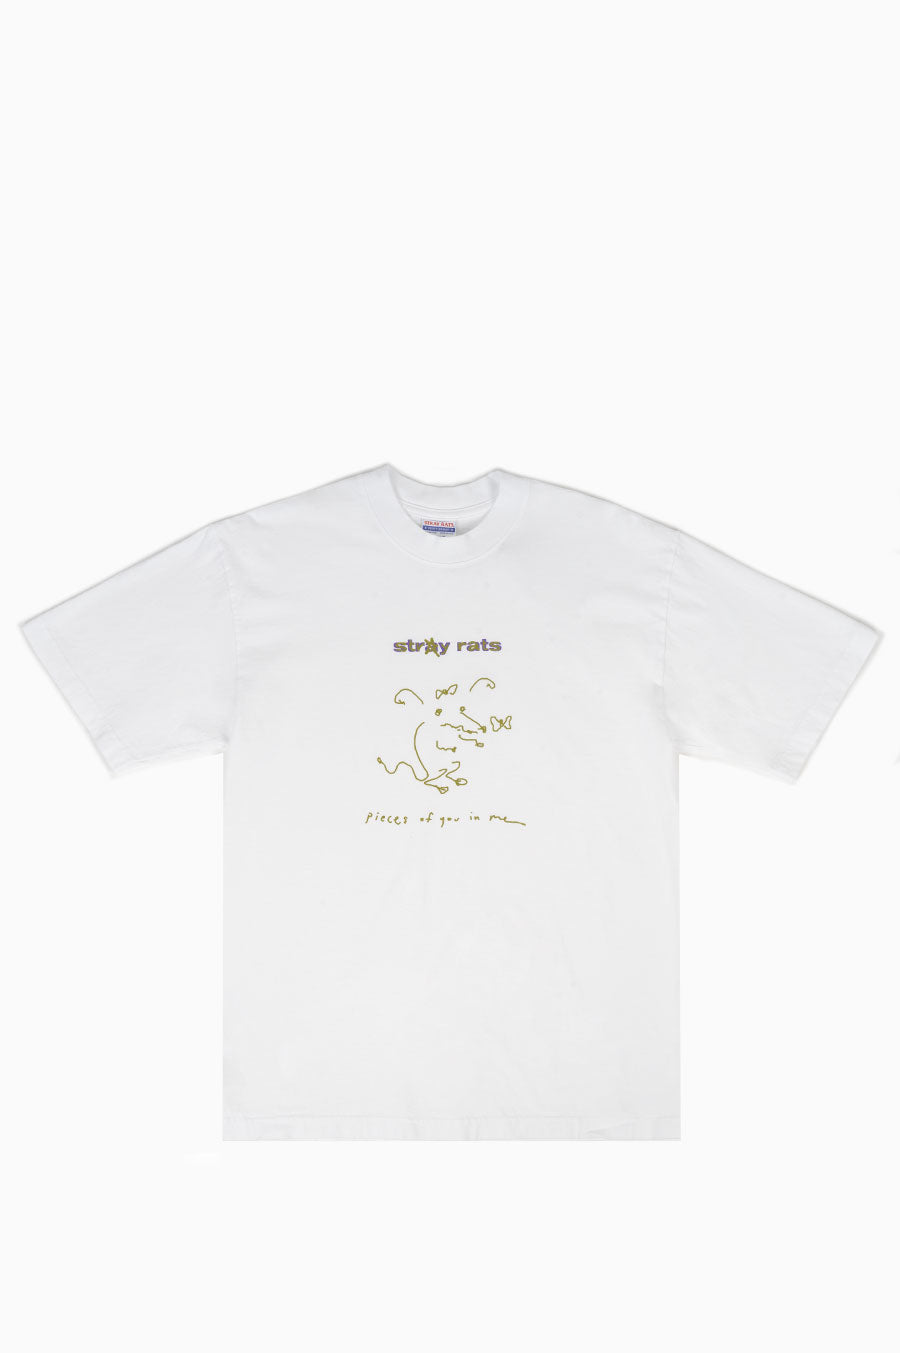 STRAY RATS PIECES OF YOU TEE WHITE